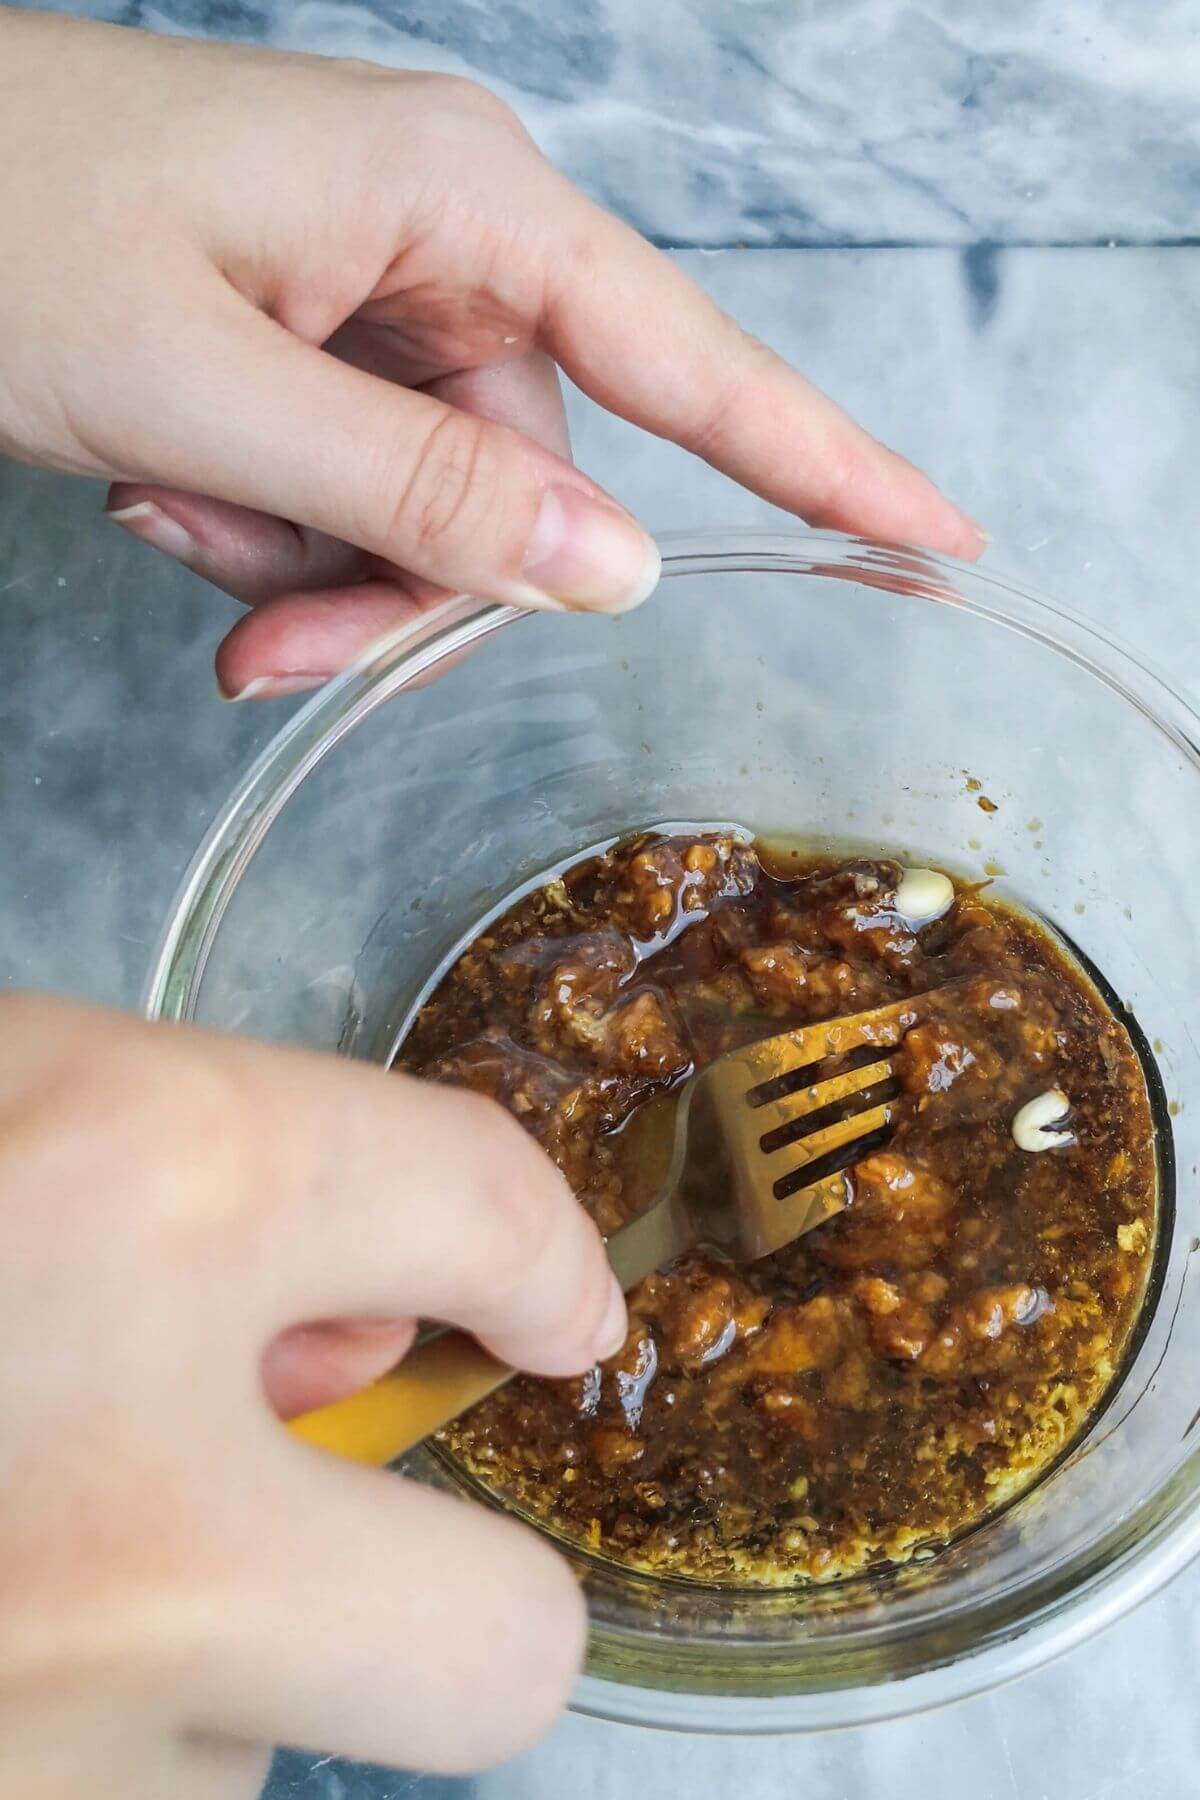 Mixing the miso marinade in a small glass bowl with a gold fork.